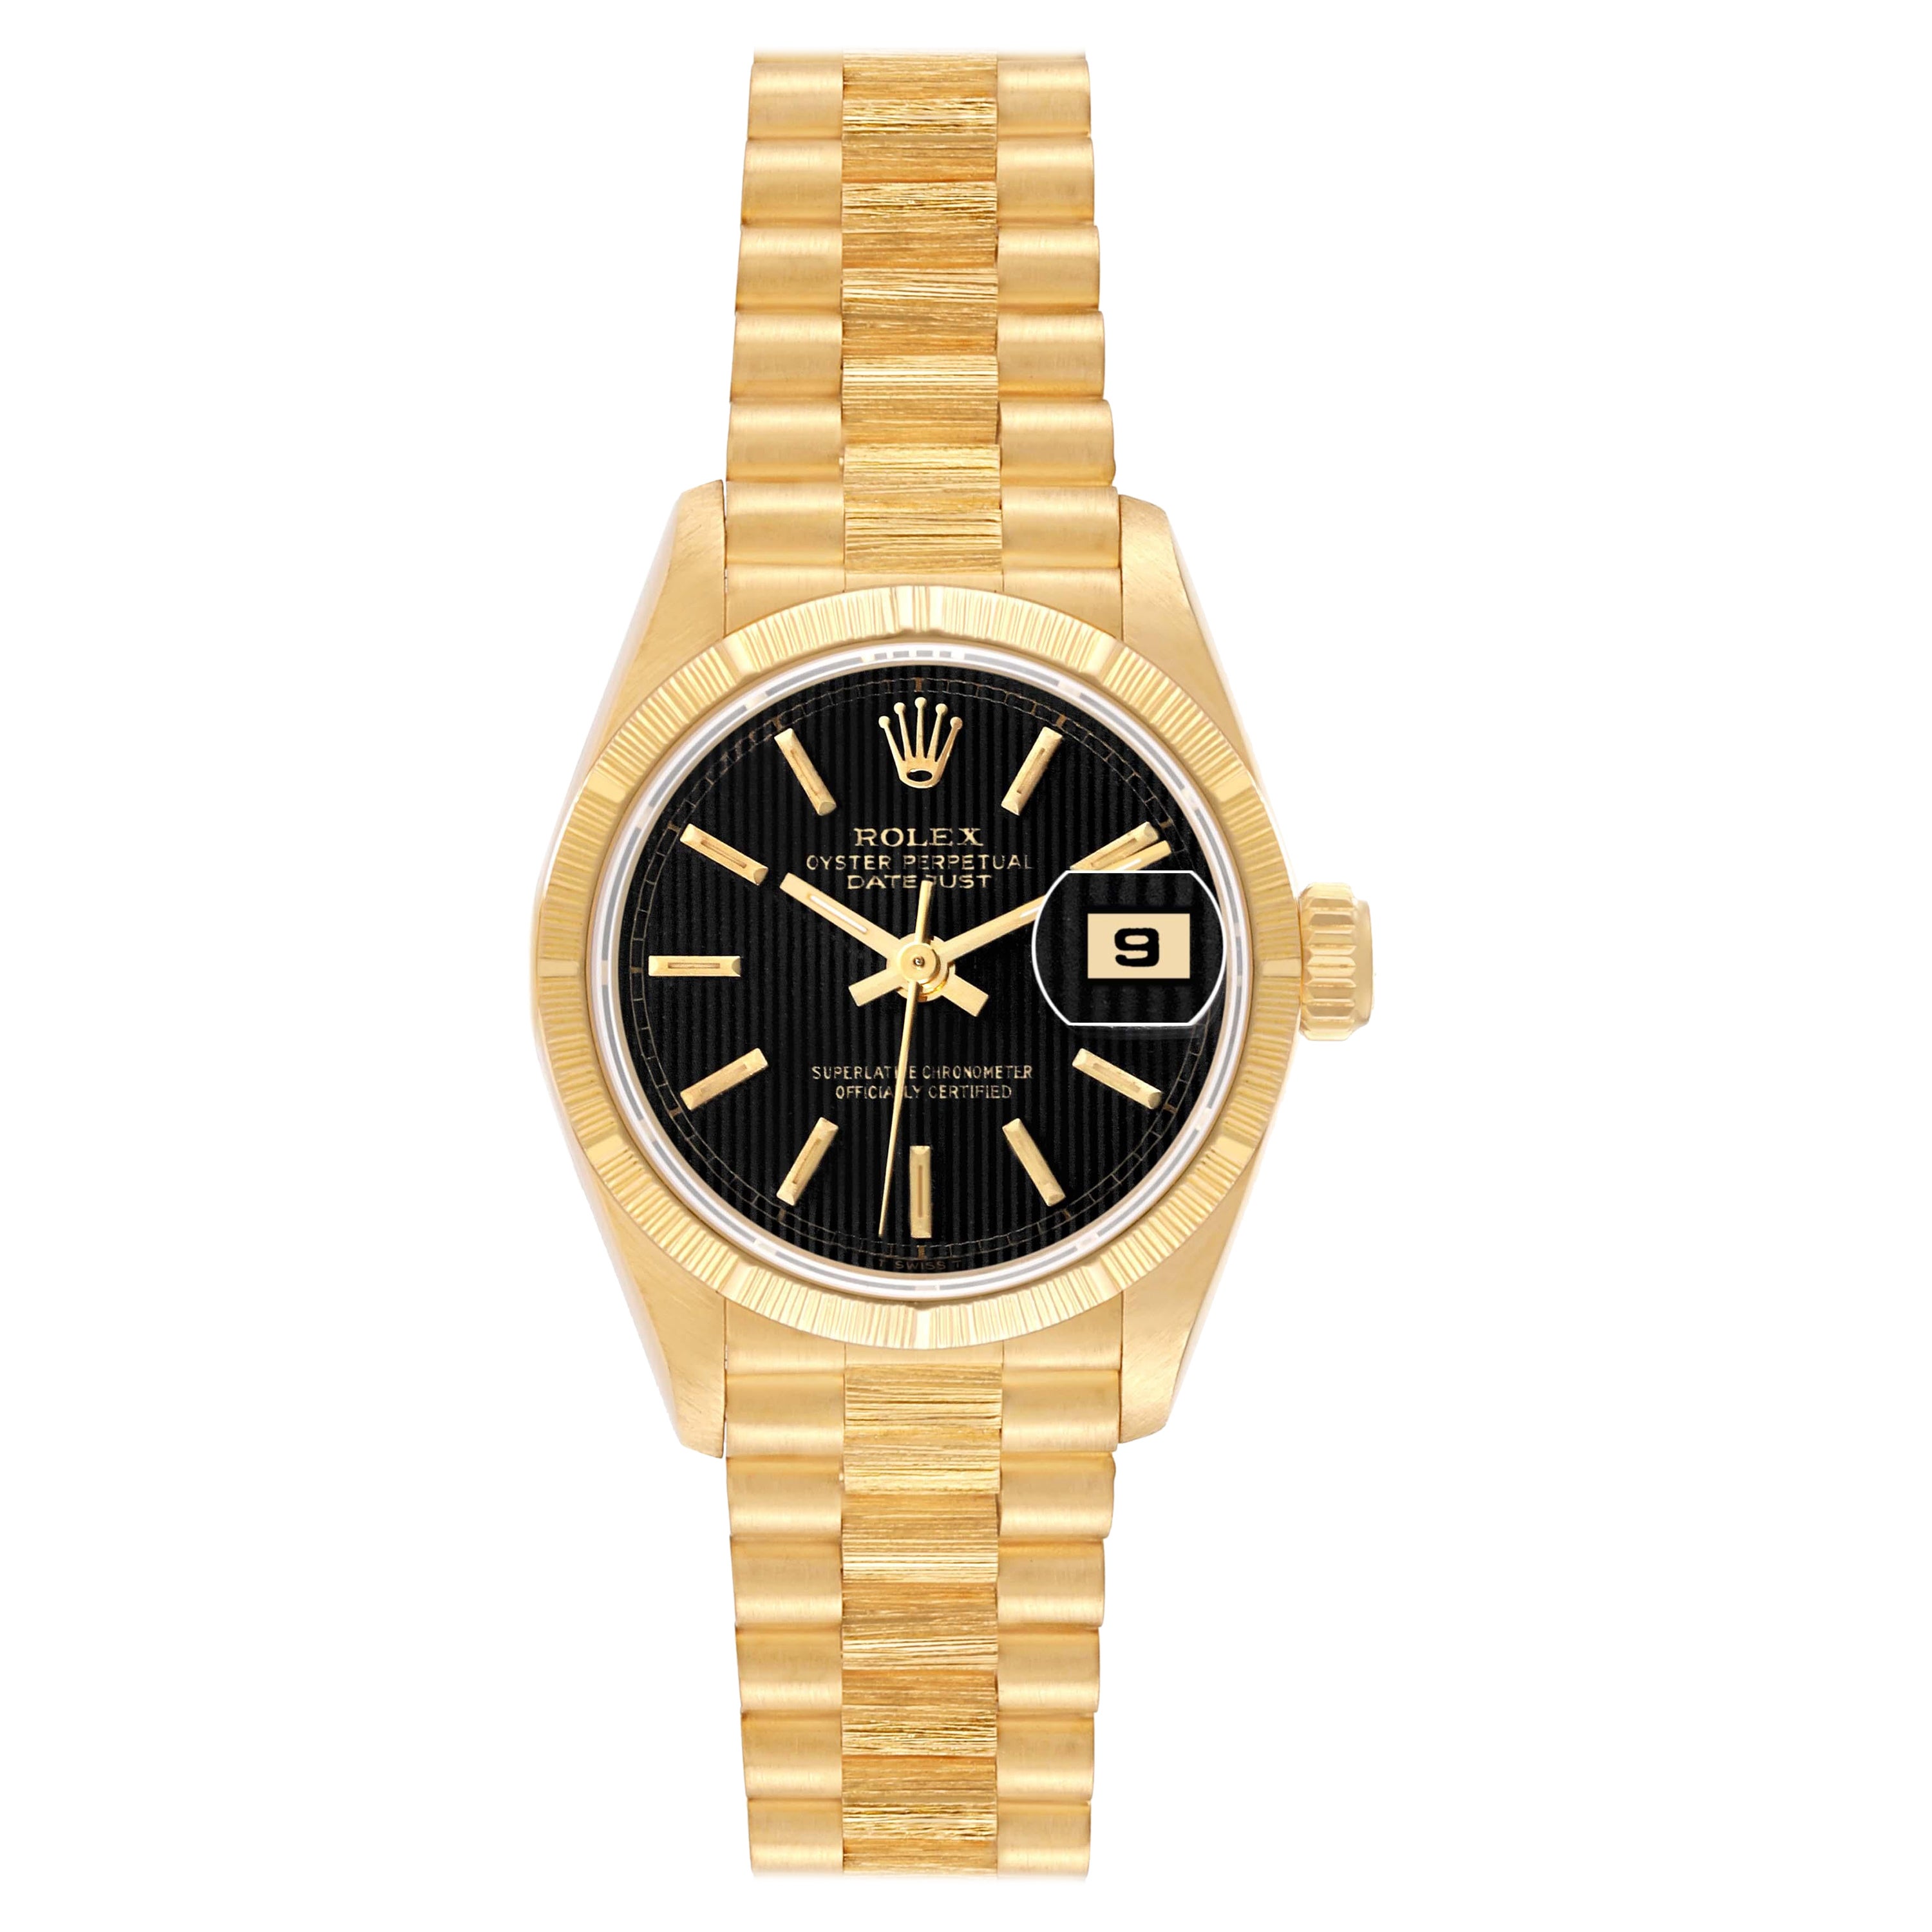 Rolex Datejust President Yellow Gold Bark Finish Ladies Watch 69278 Box Papers